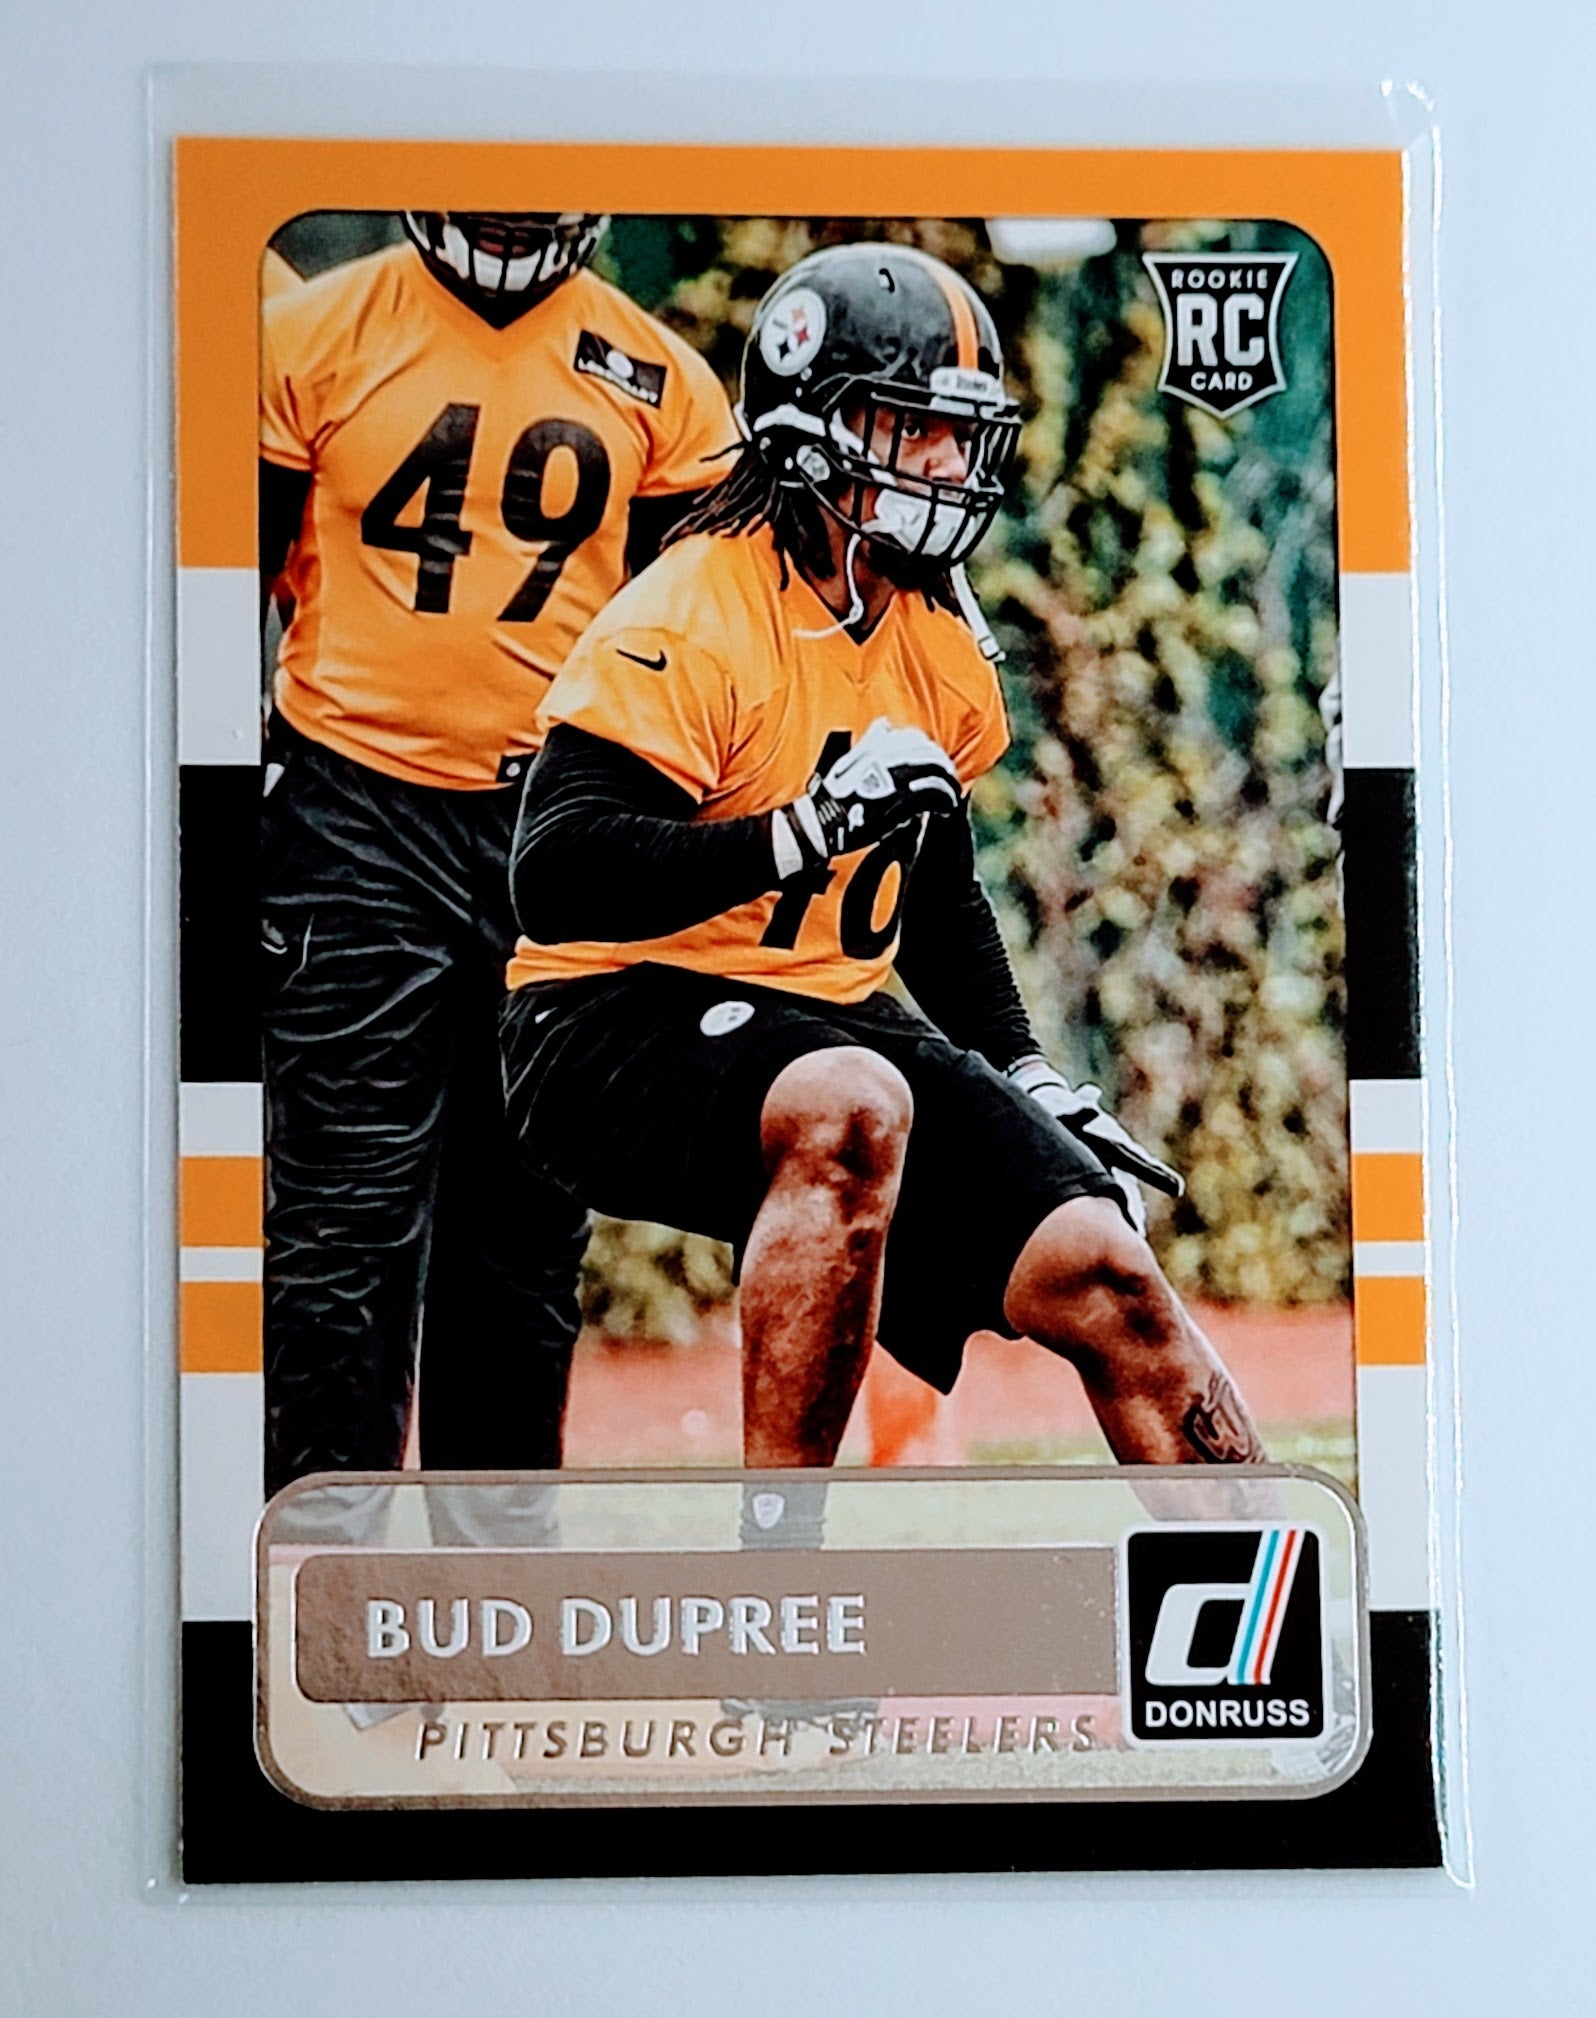 2015 Donruss Bud Dupree RC Football Card  TH13C simple Xclusive Collectibles   